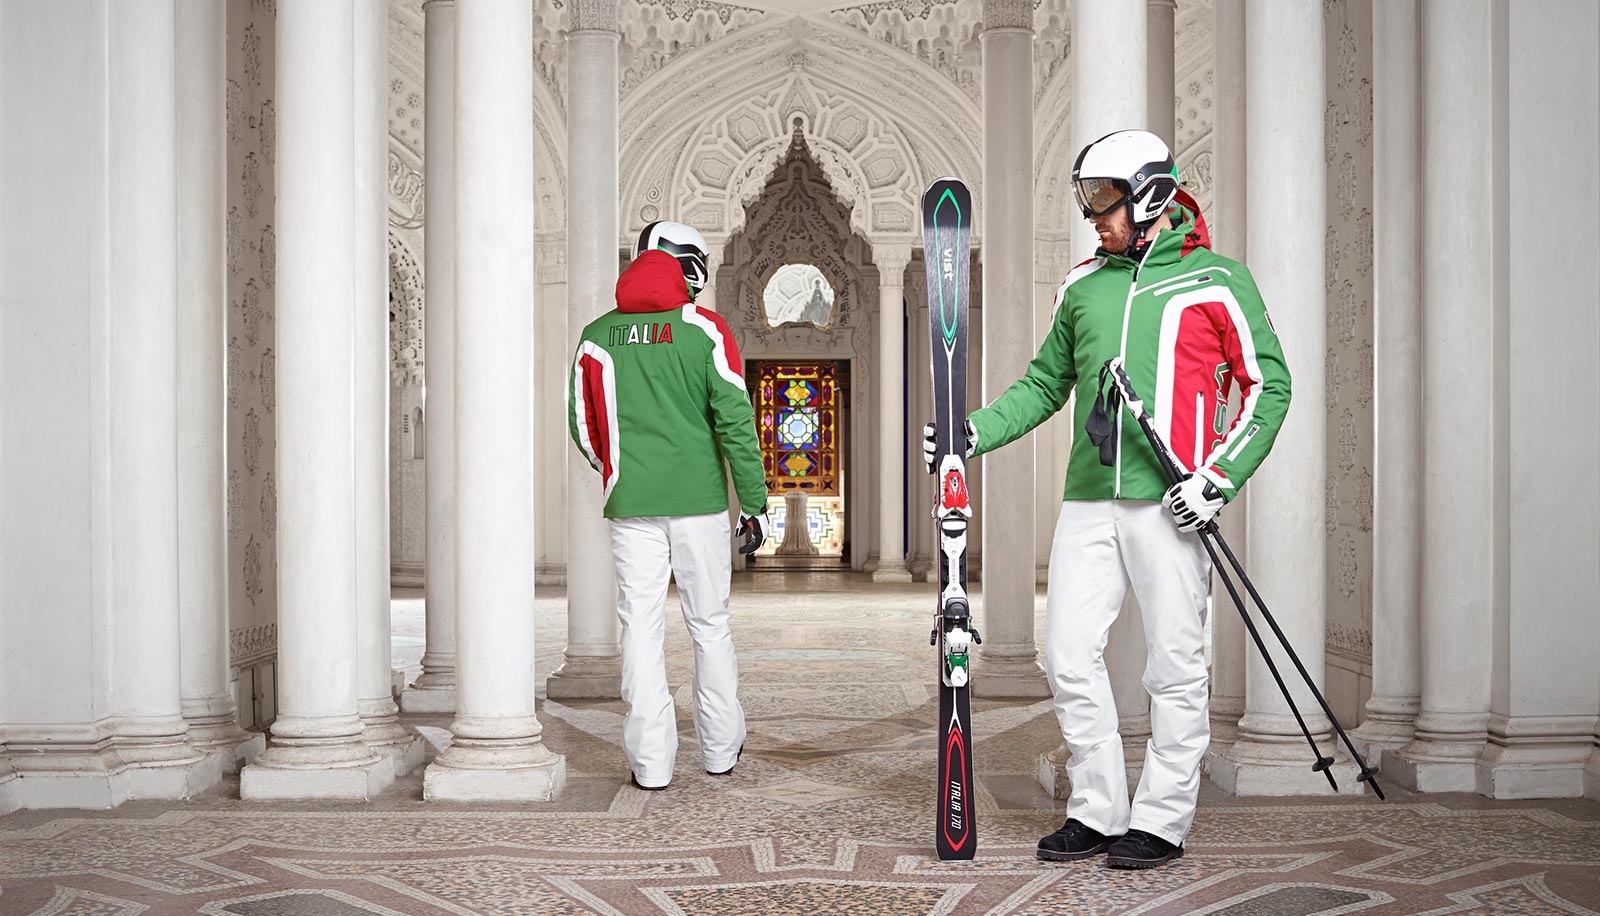 Two fully equipped skier in a Middle Eastern looking hall